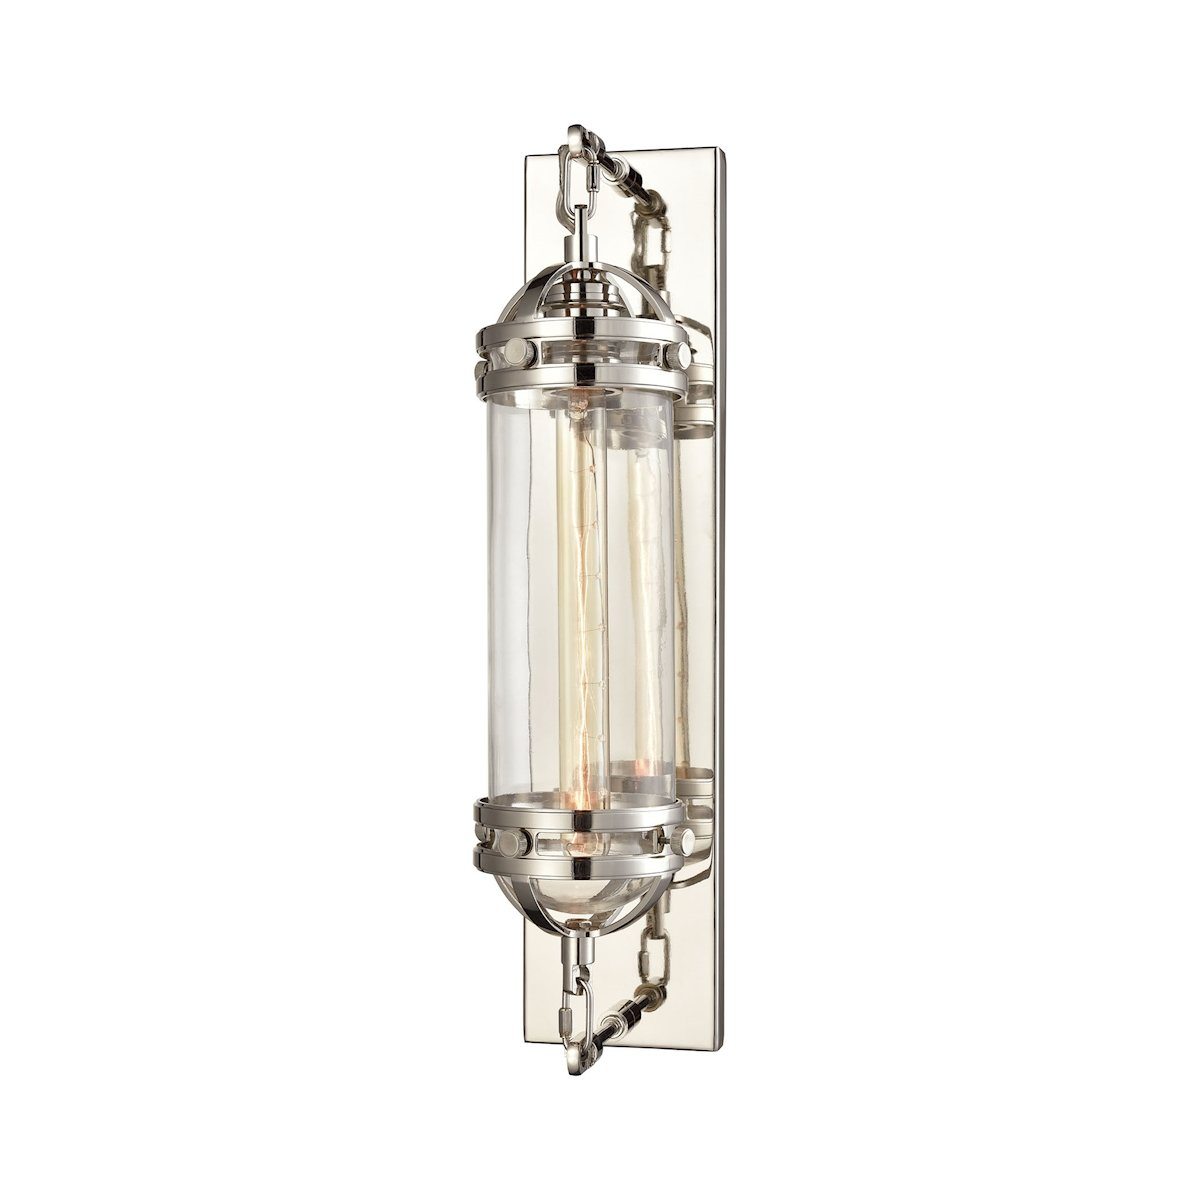 Gramercy 1 Light Wall Sconce In Polished Nickel With Clear Glass Wall Sconce Elk Lighting 